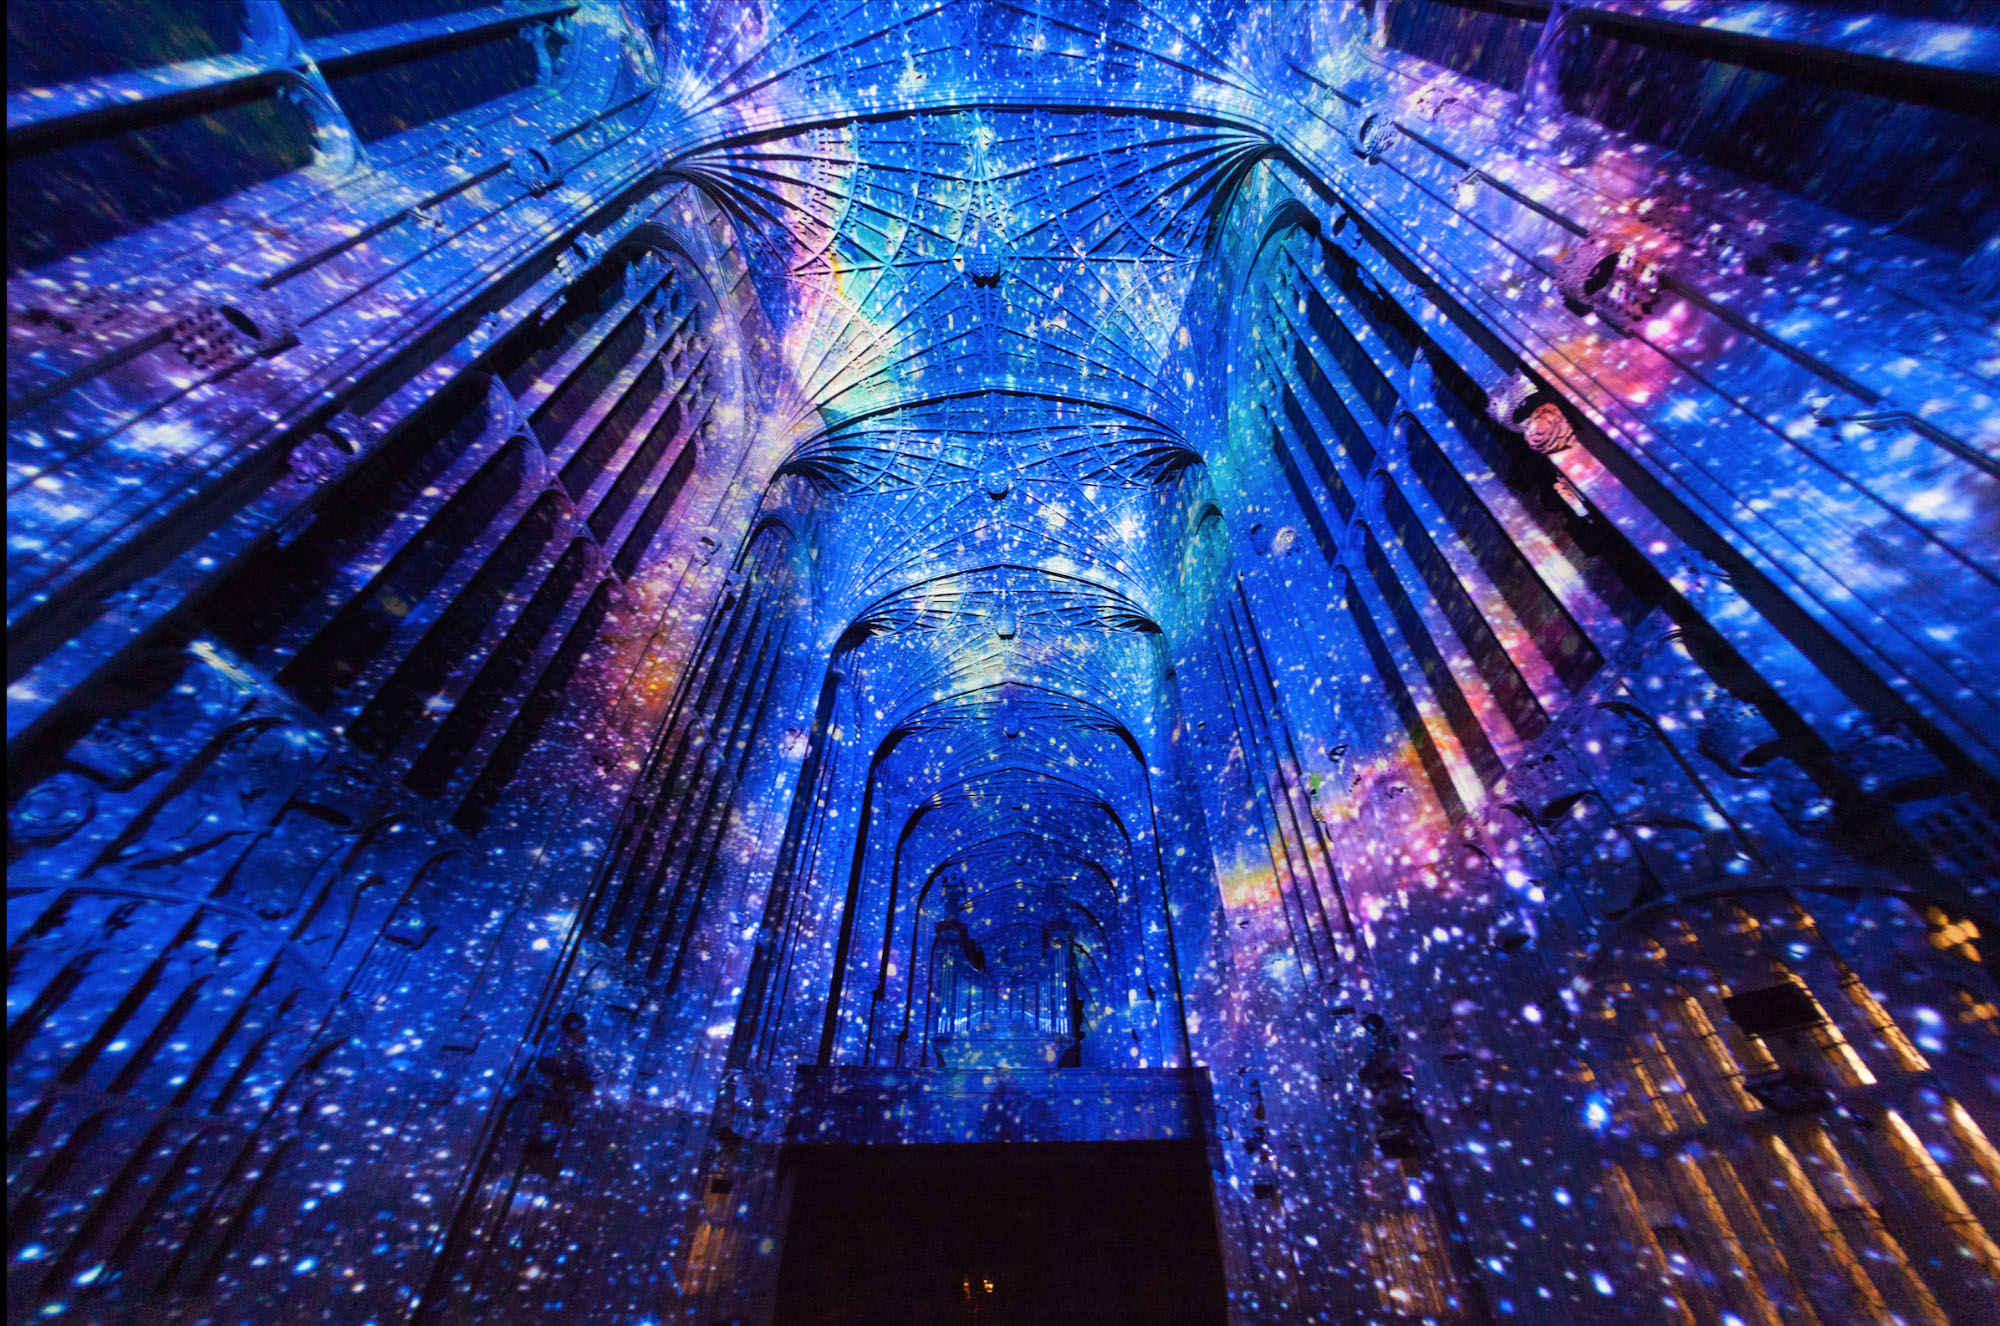 miguel-chevaliers-immersive-projections-at-kings-college-chapel-in-cambridge-maltm_com_01